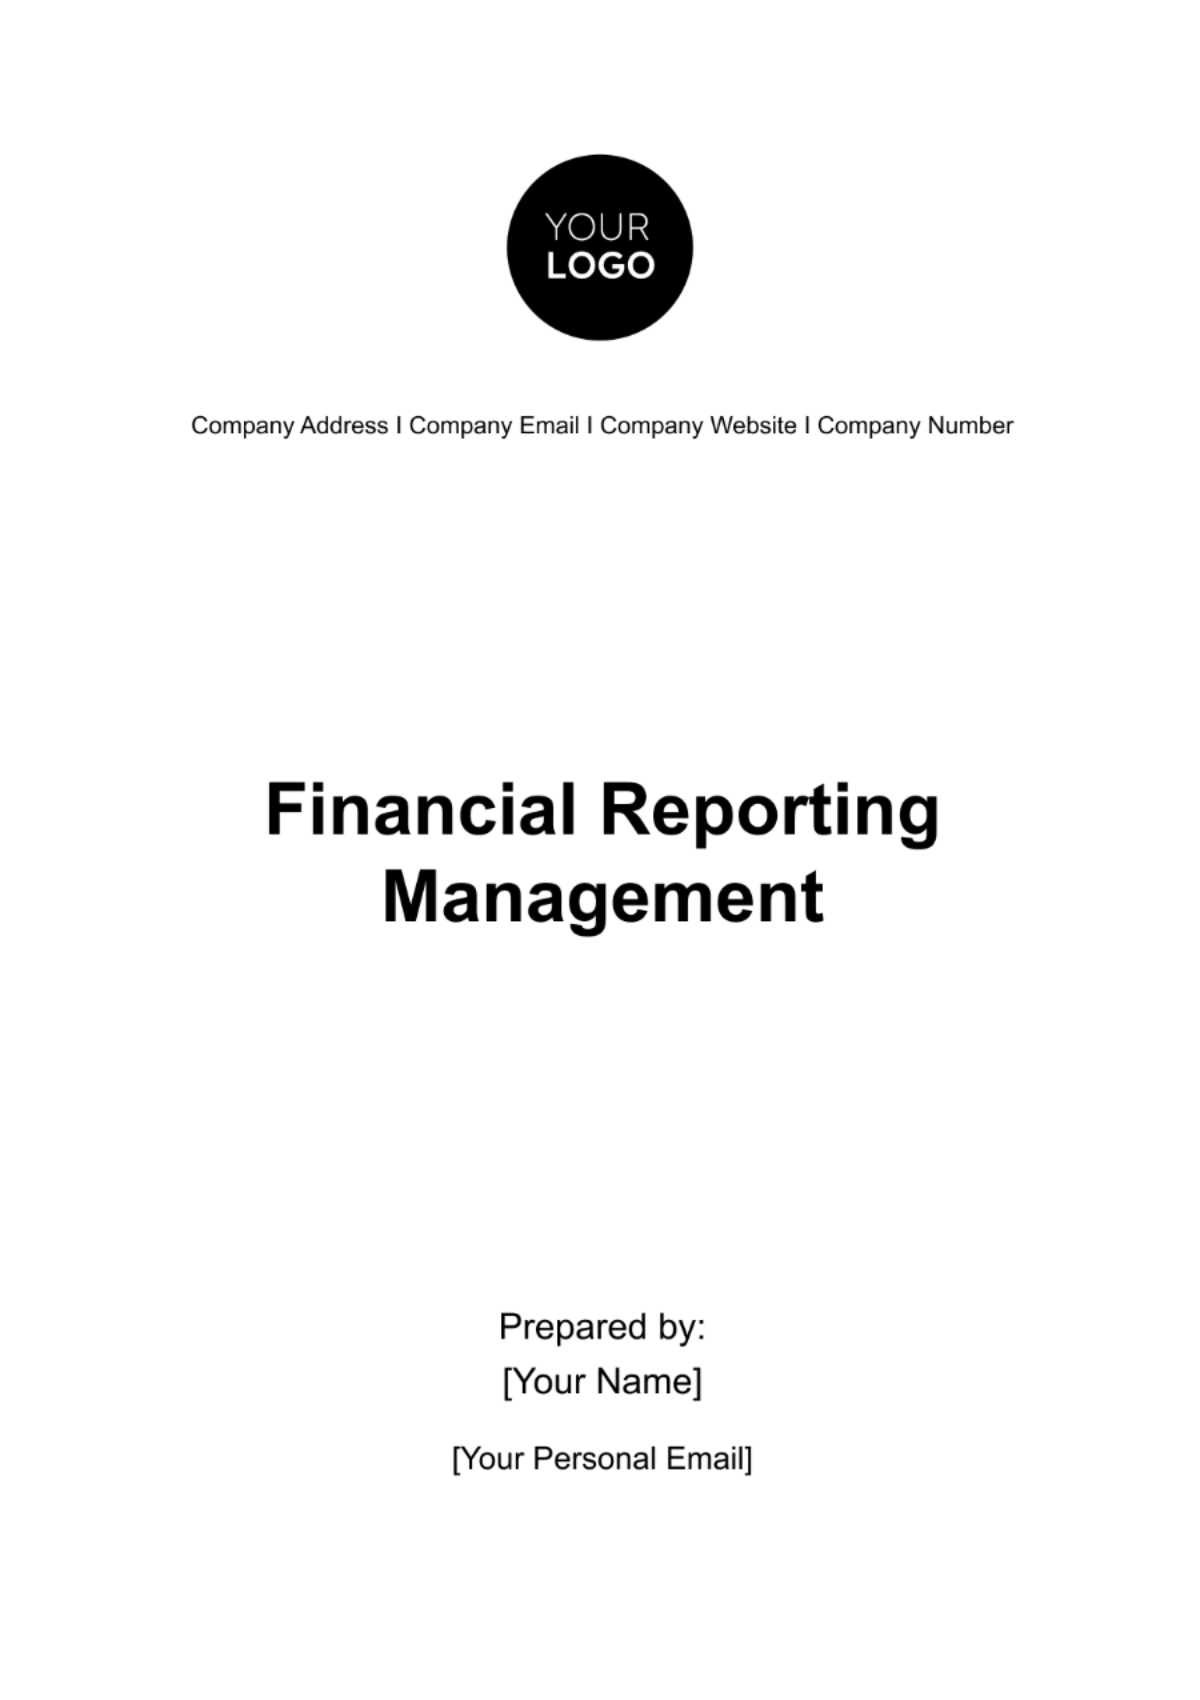 Financial Reporting Management Template